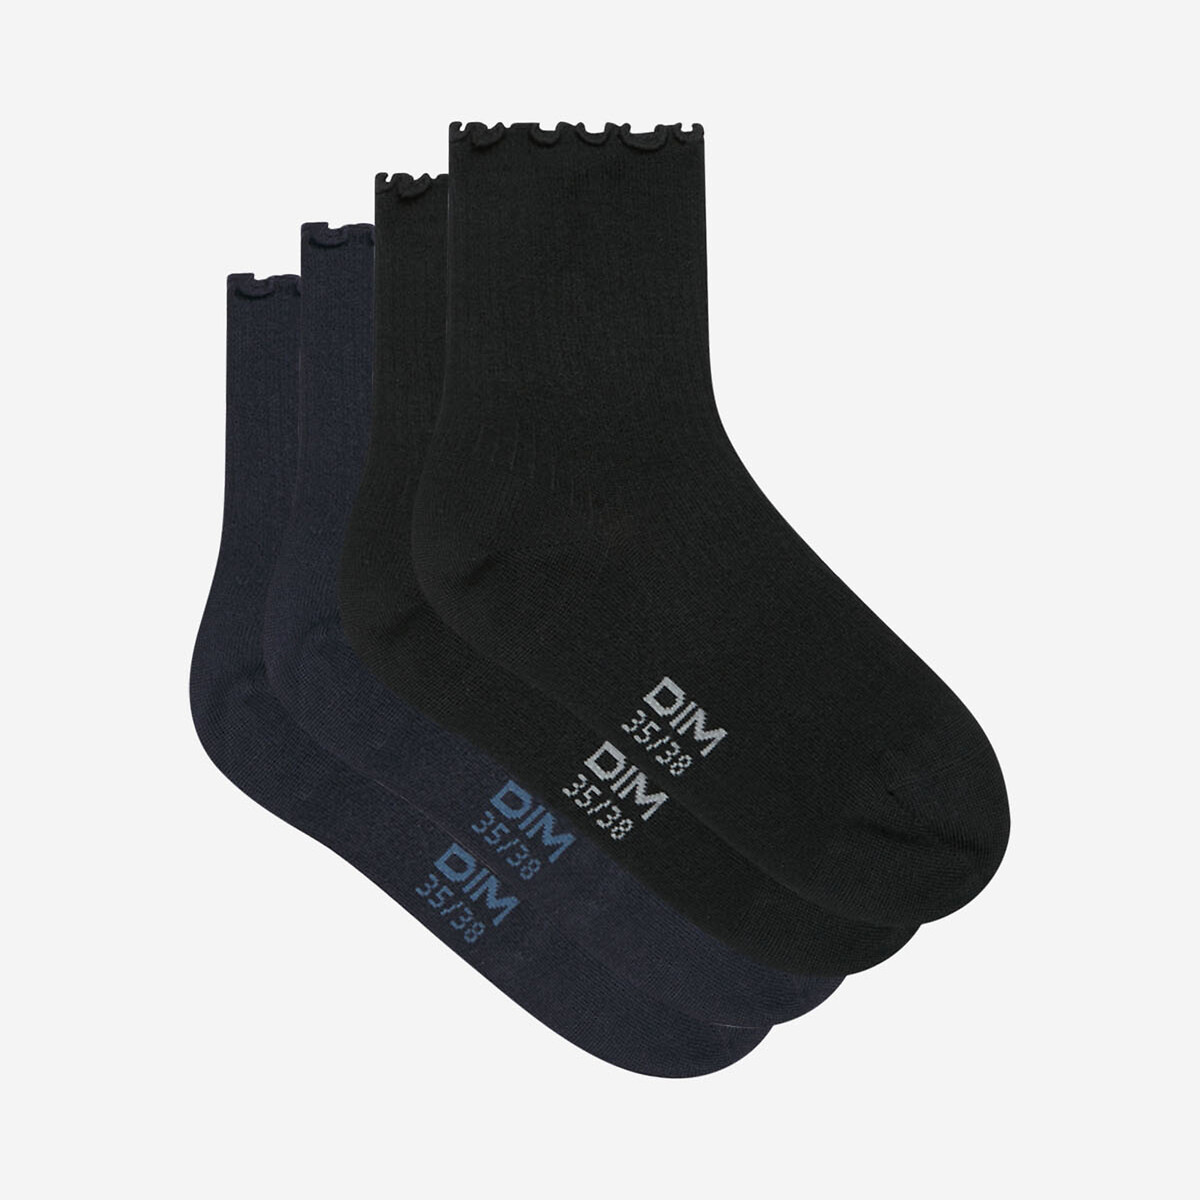 Image of Pack of 2 Pairs of Socks with Ruffled Edging